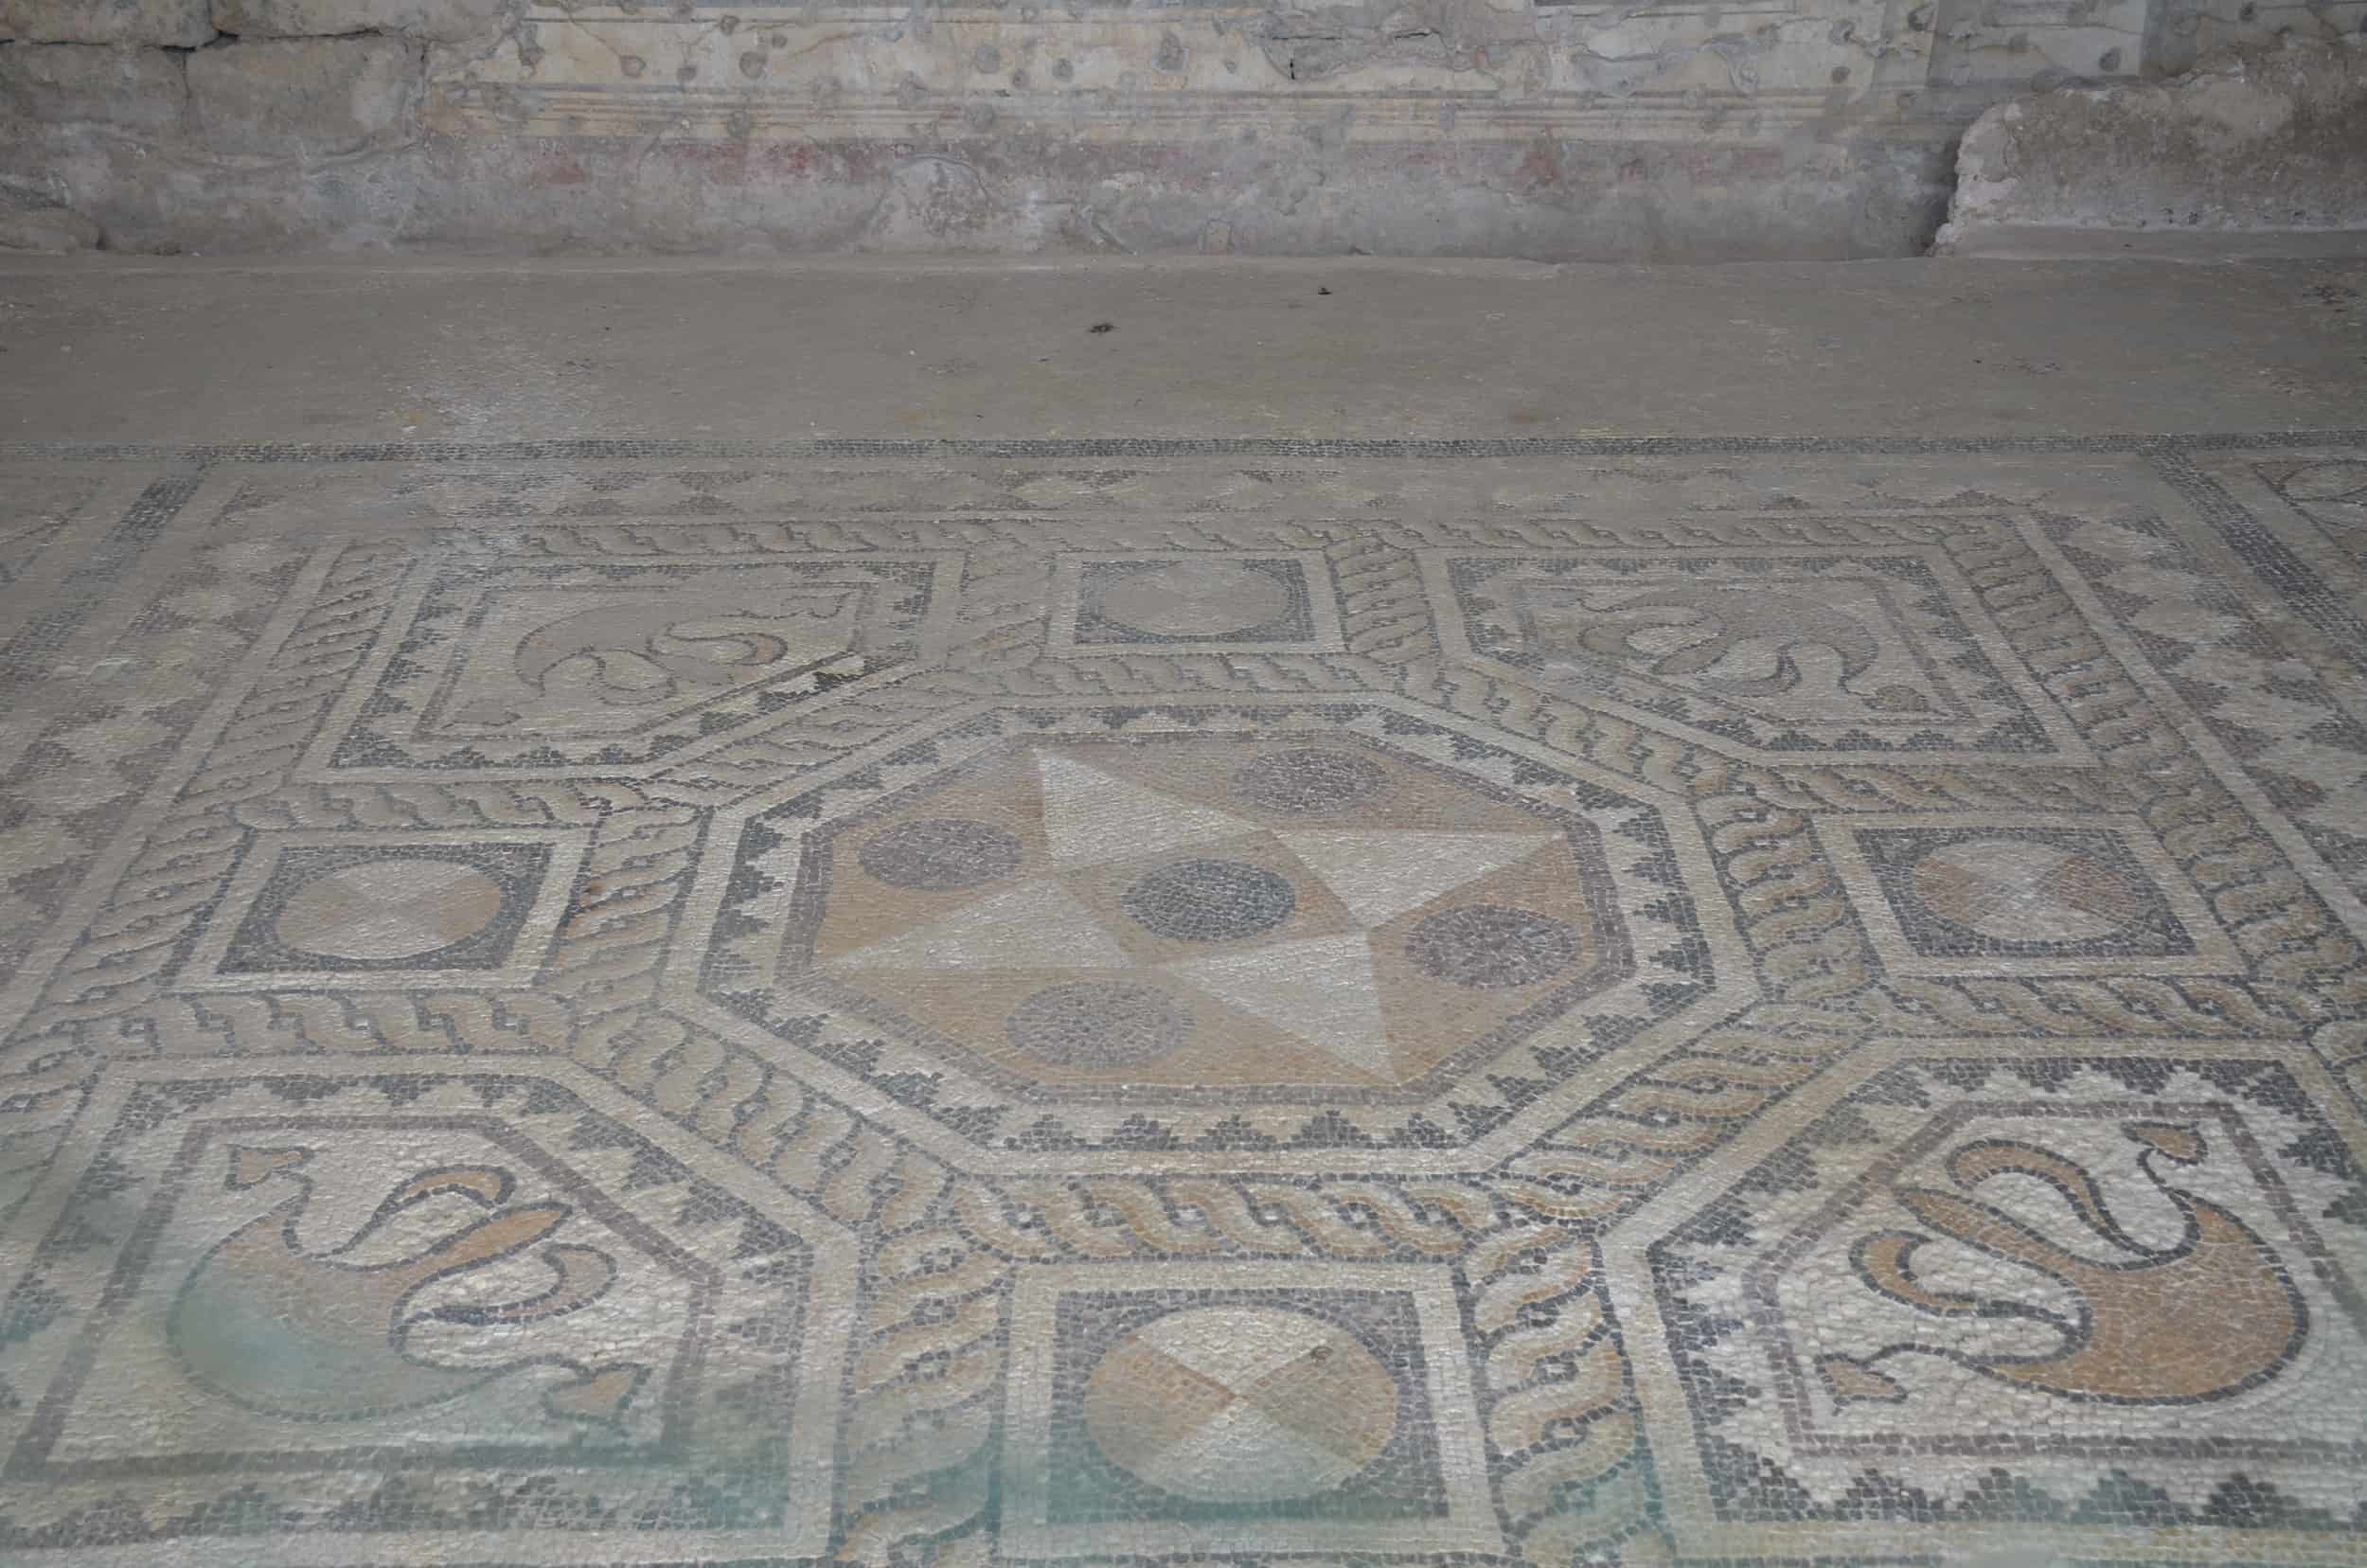 Mosaic floor at the House of Attalus in the Lower Acropolis of Pergamon